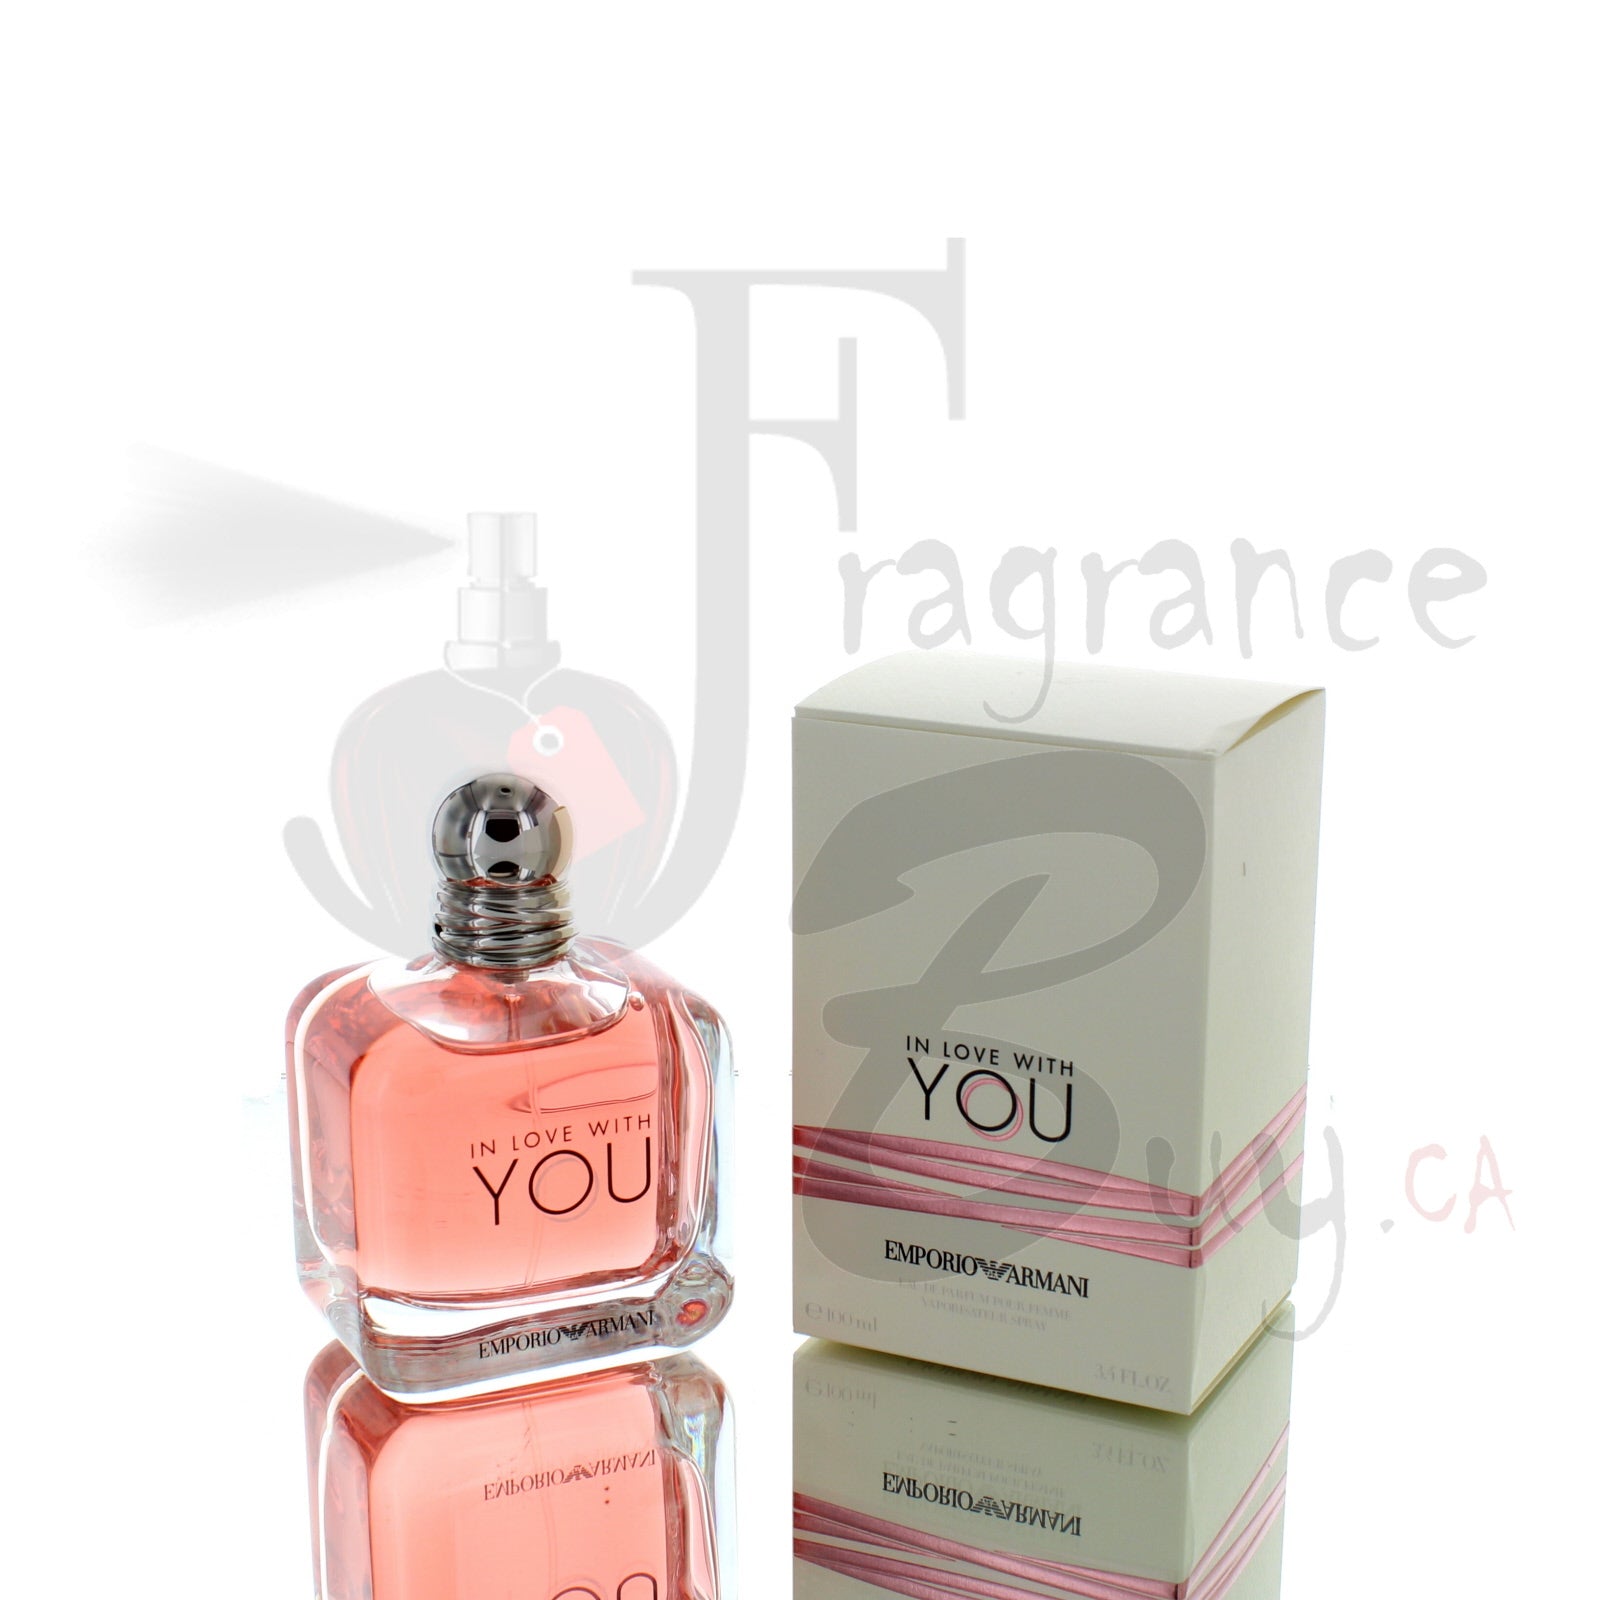 in love with you parfum armani